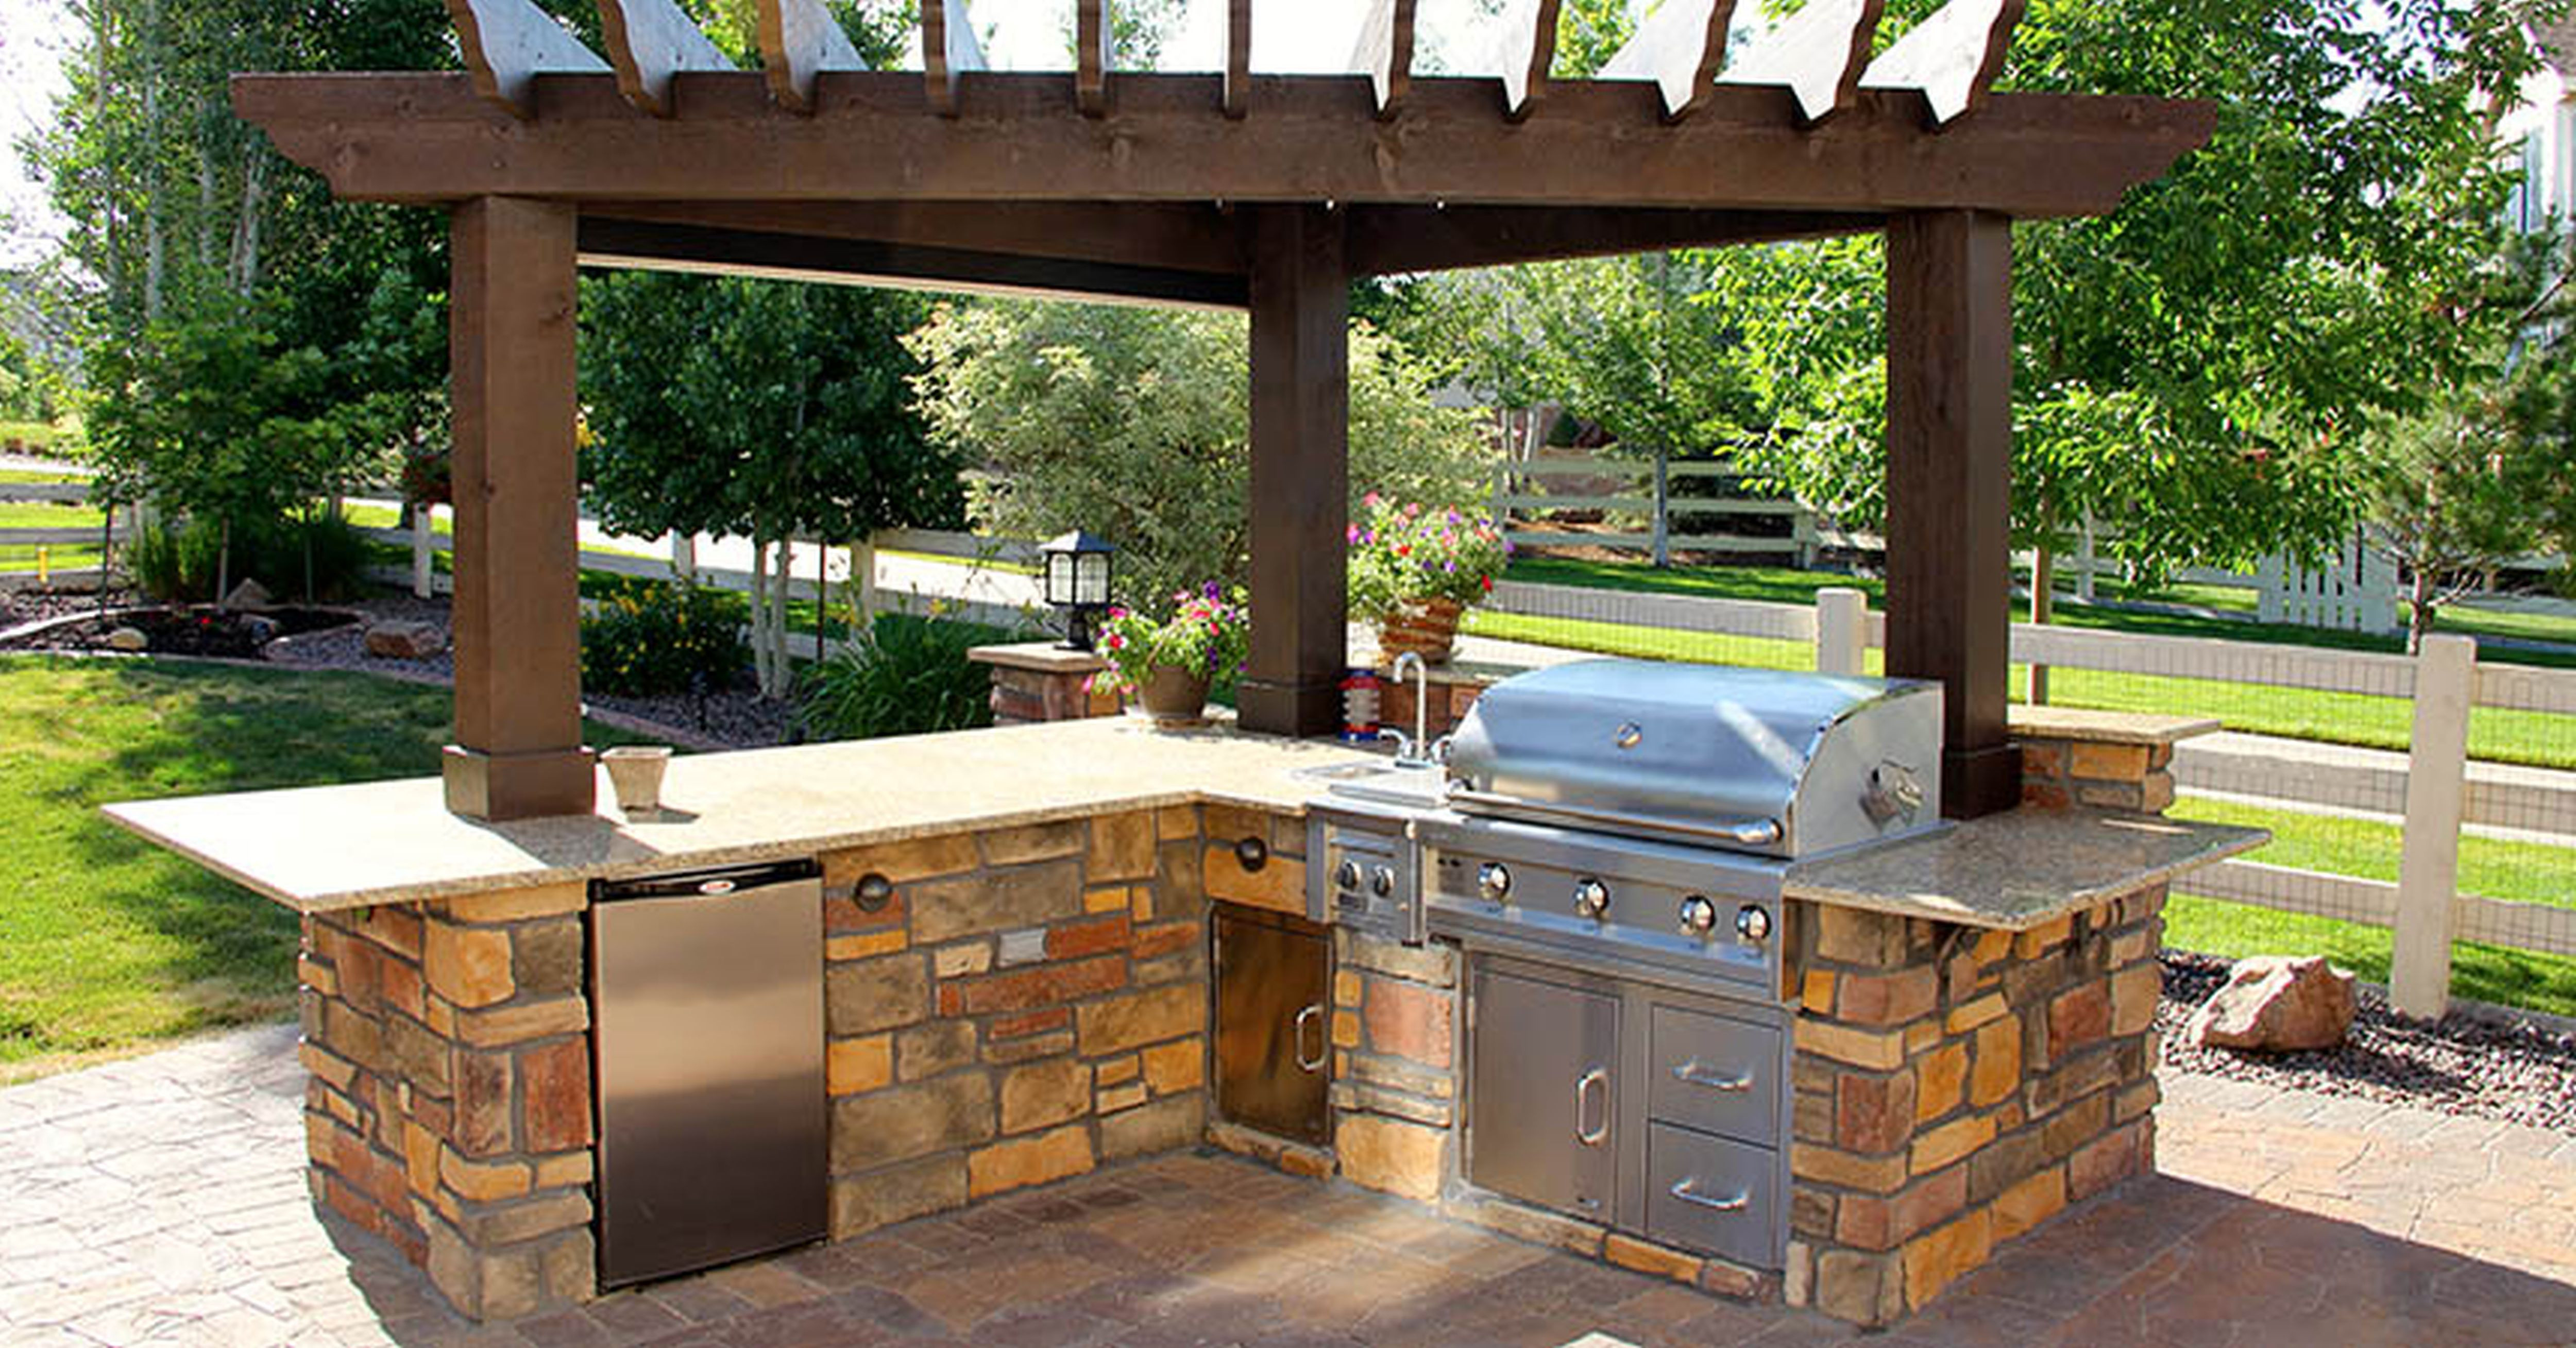 Outdoor Kitchen Designs Plans
 Outdoor Kitchen Plans Ideas and Tips for Getting the